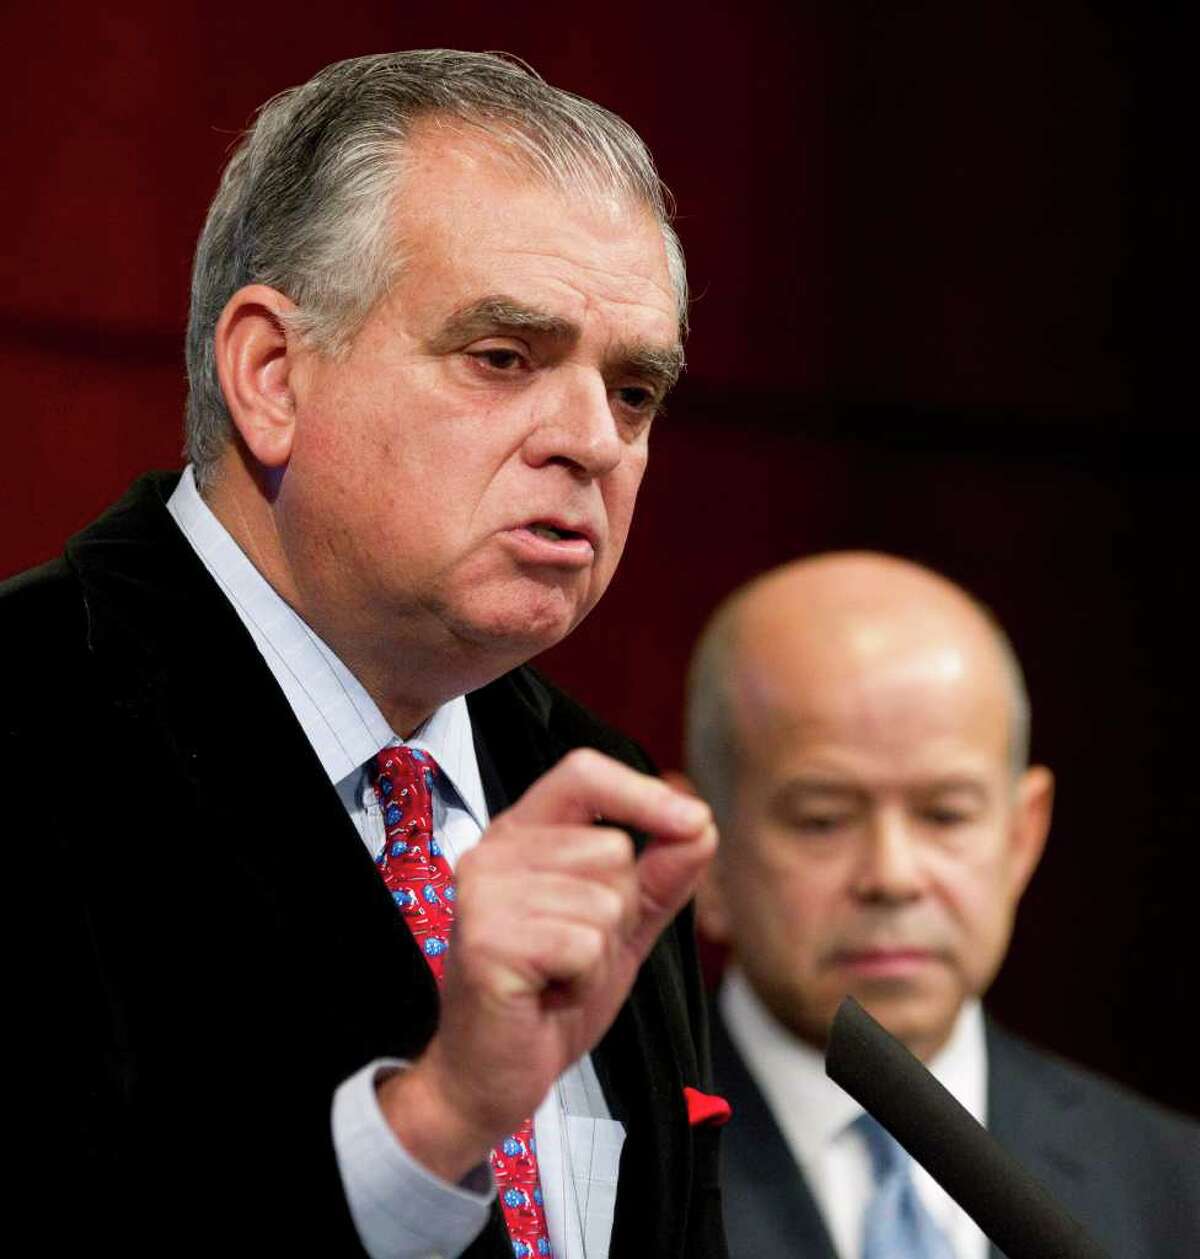 Transportation Secretary Ray LaHood, left, with Federal Aviation Administration Acting Administrator Michael Huerta, speak to reporters during a news conference at the Department of Transportation in Washington, Wednesday, Dec. 21, 2011, announcing a sweeping final rule that overhauls commercial passenger airline pilots scheduling to ensure pilots have a longer opportunity to rest before they enter the cockpit. (AP Photo/Manuel Balce Ceneta)